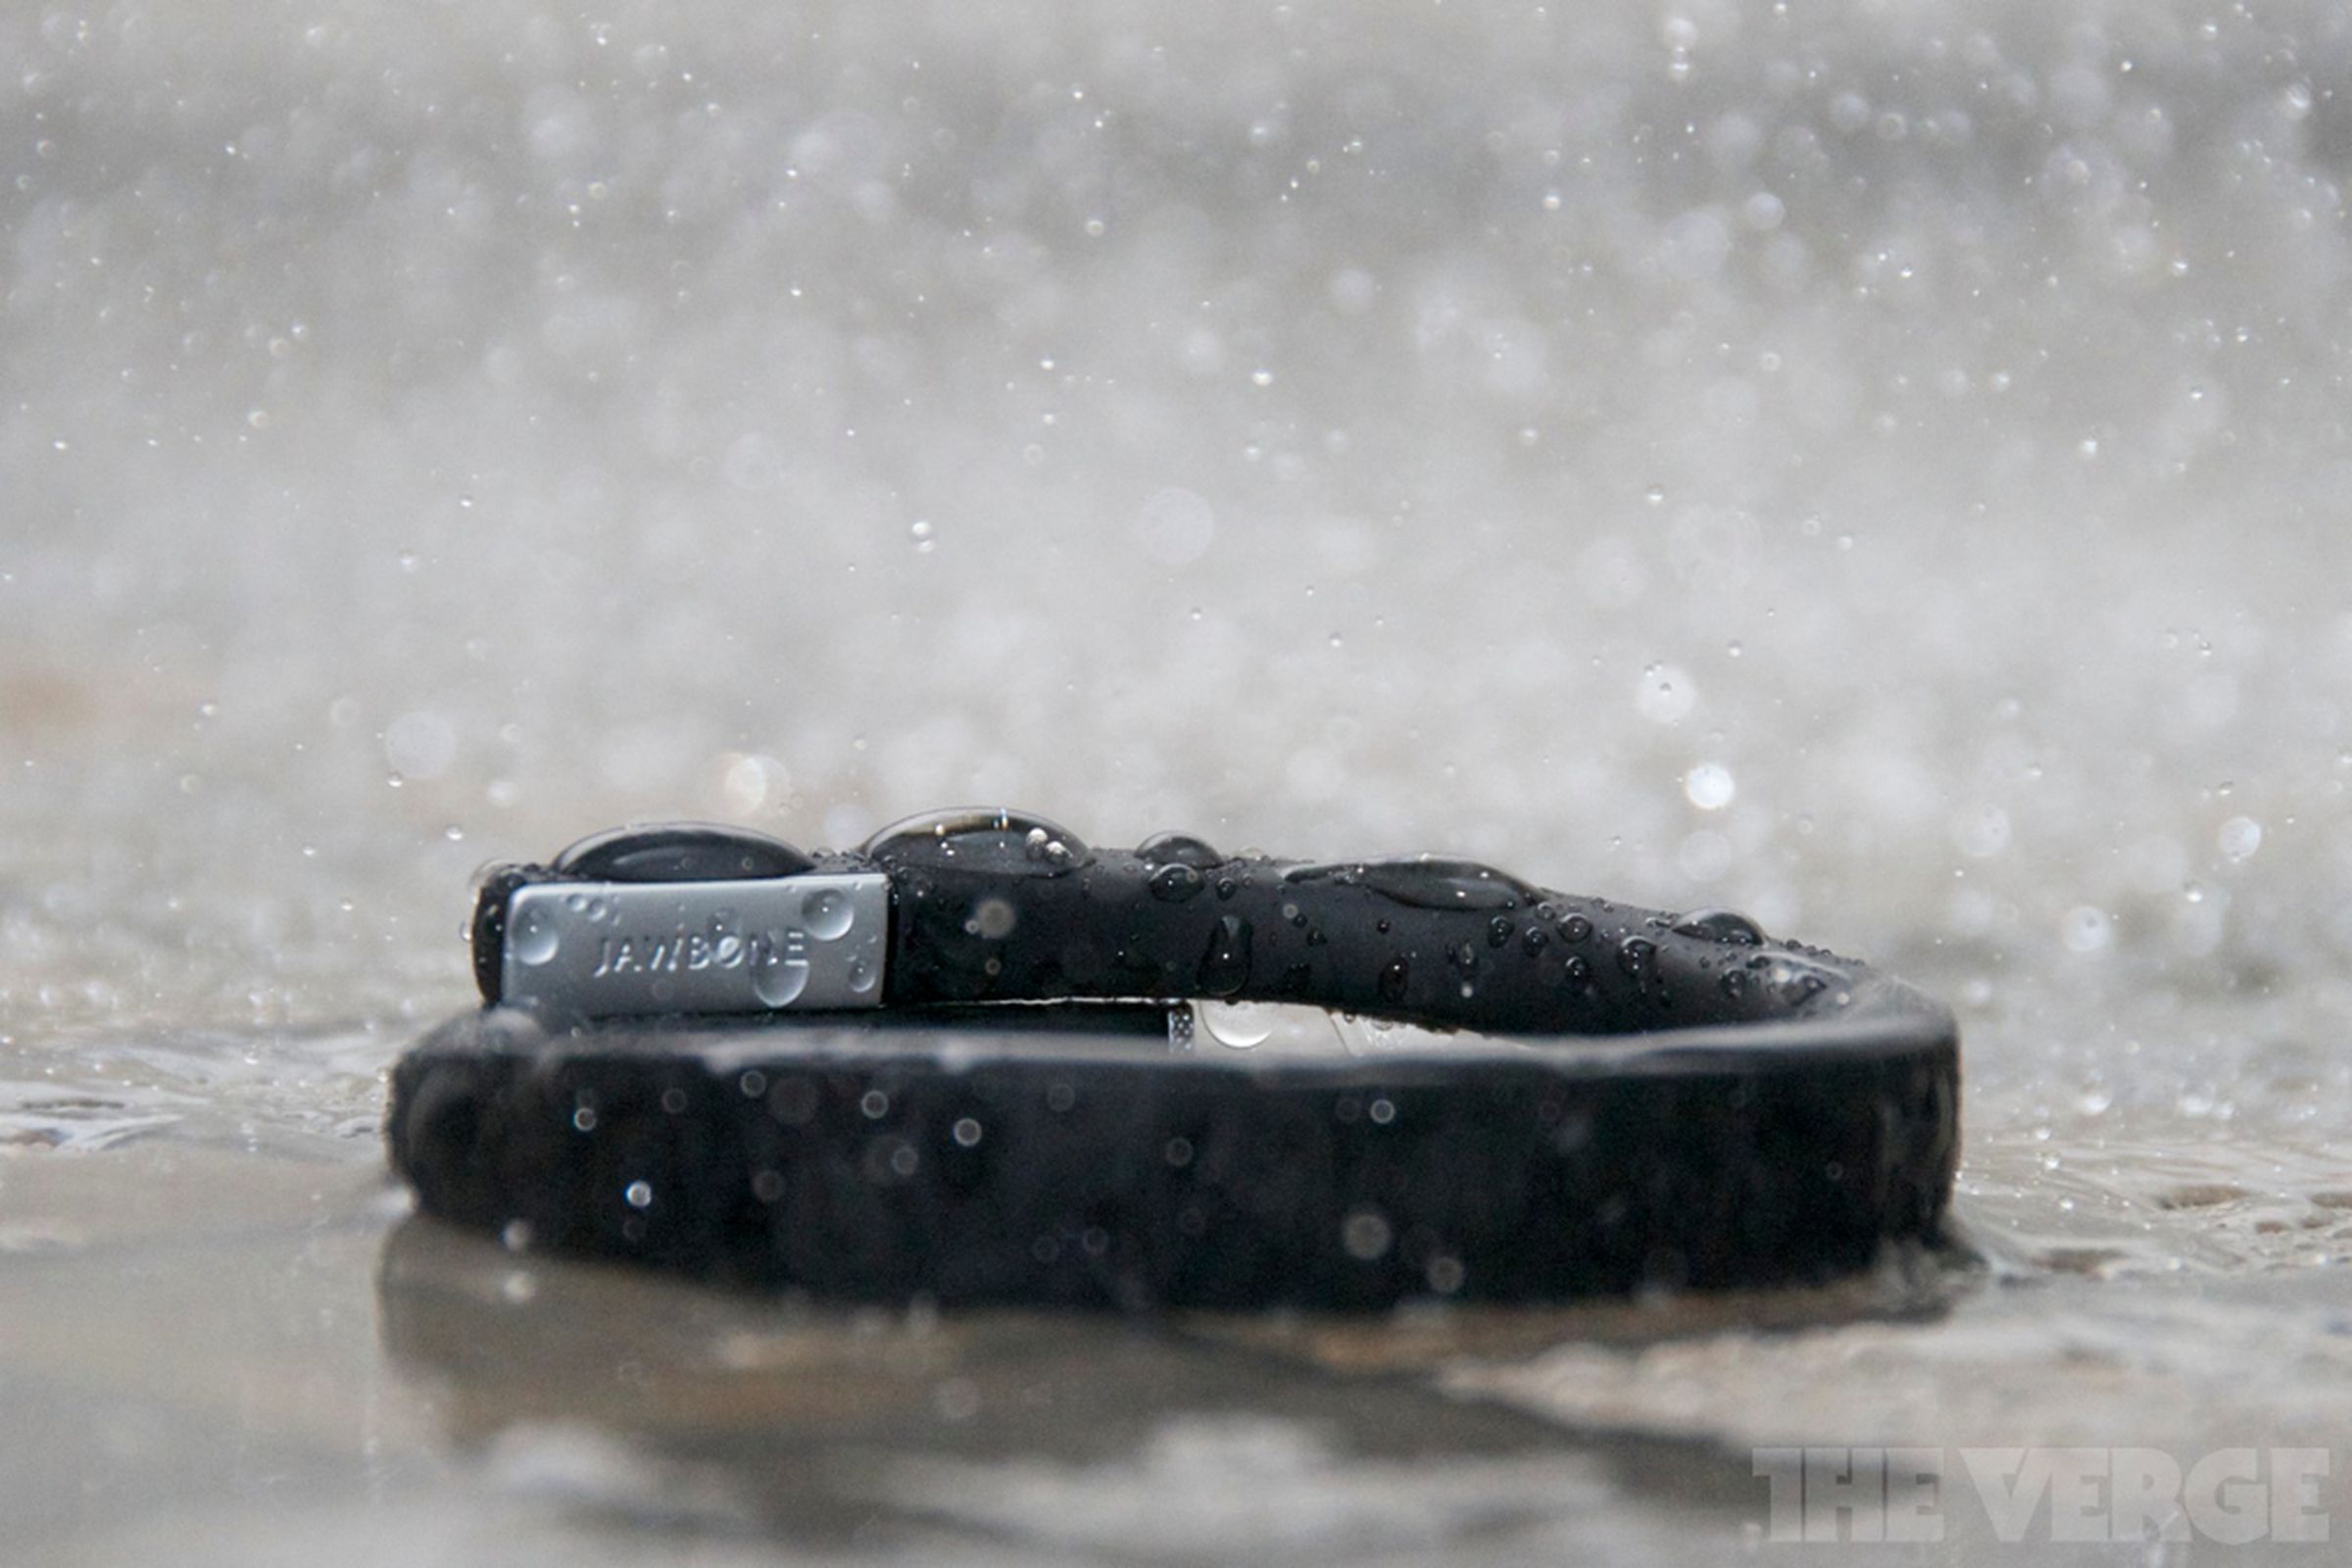 Jawbone Up review gallery